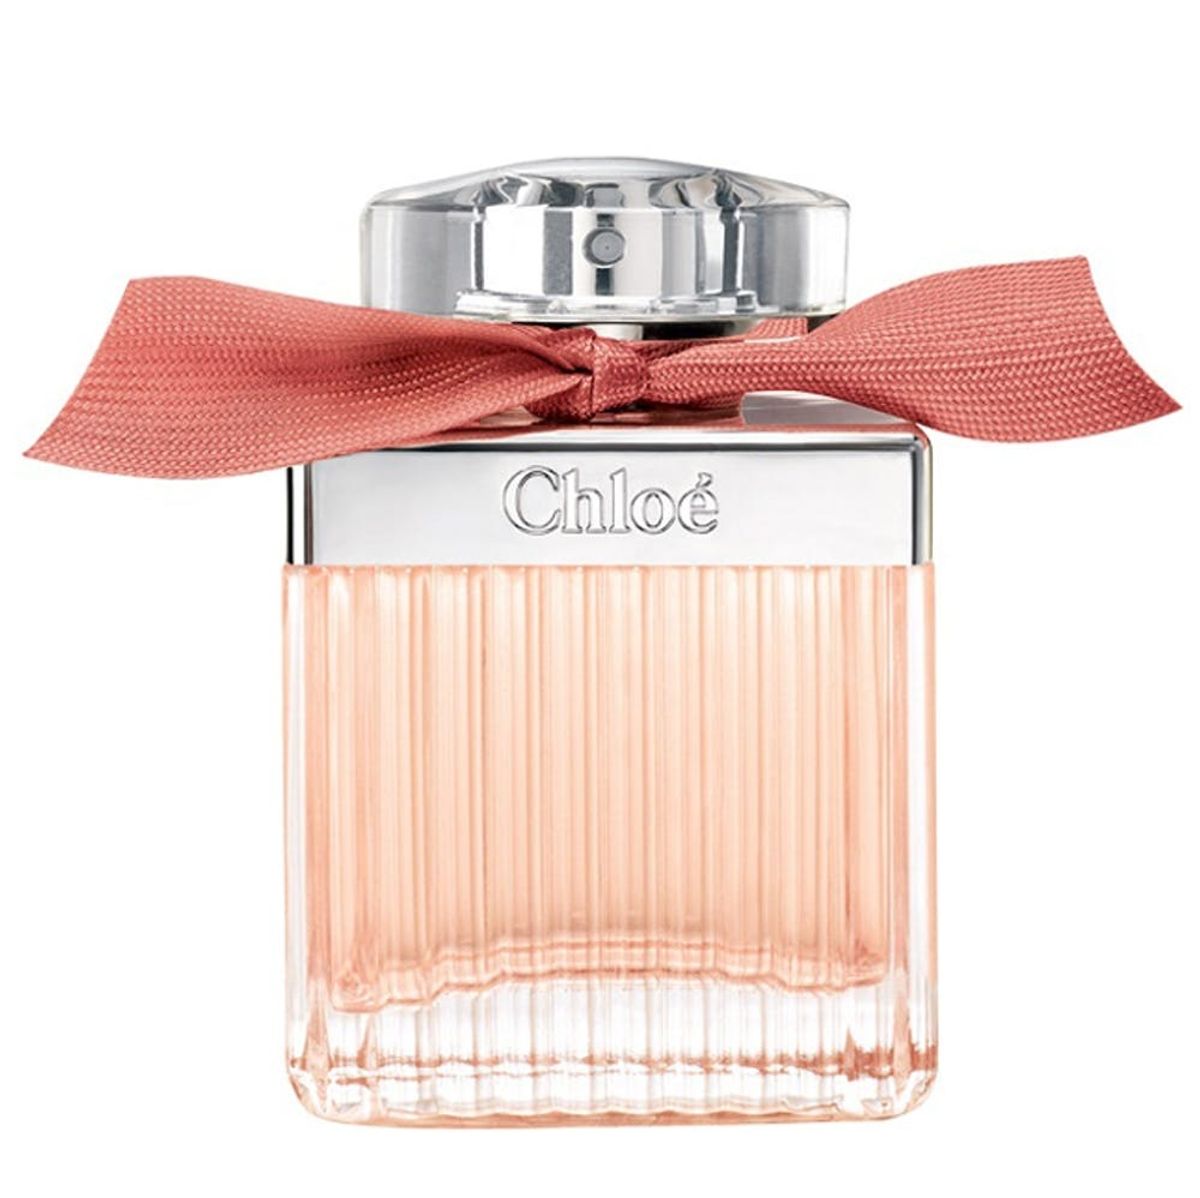 19 Rose-Scented Beauty Products You’ll Need This Spring